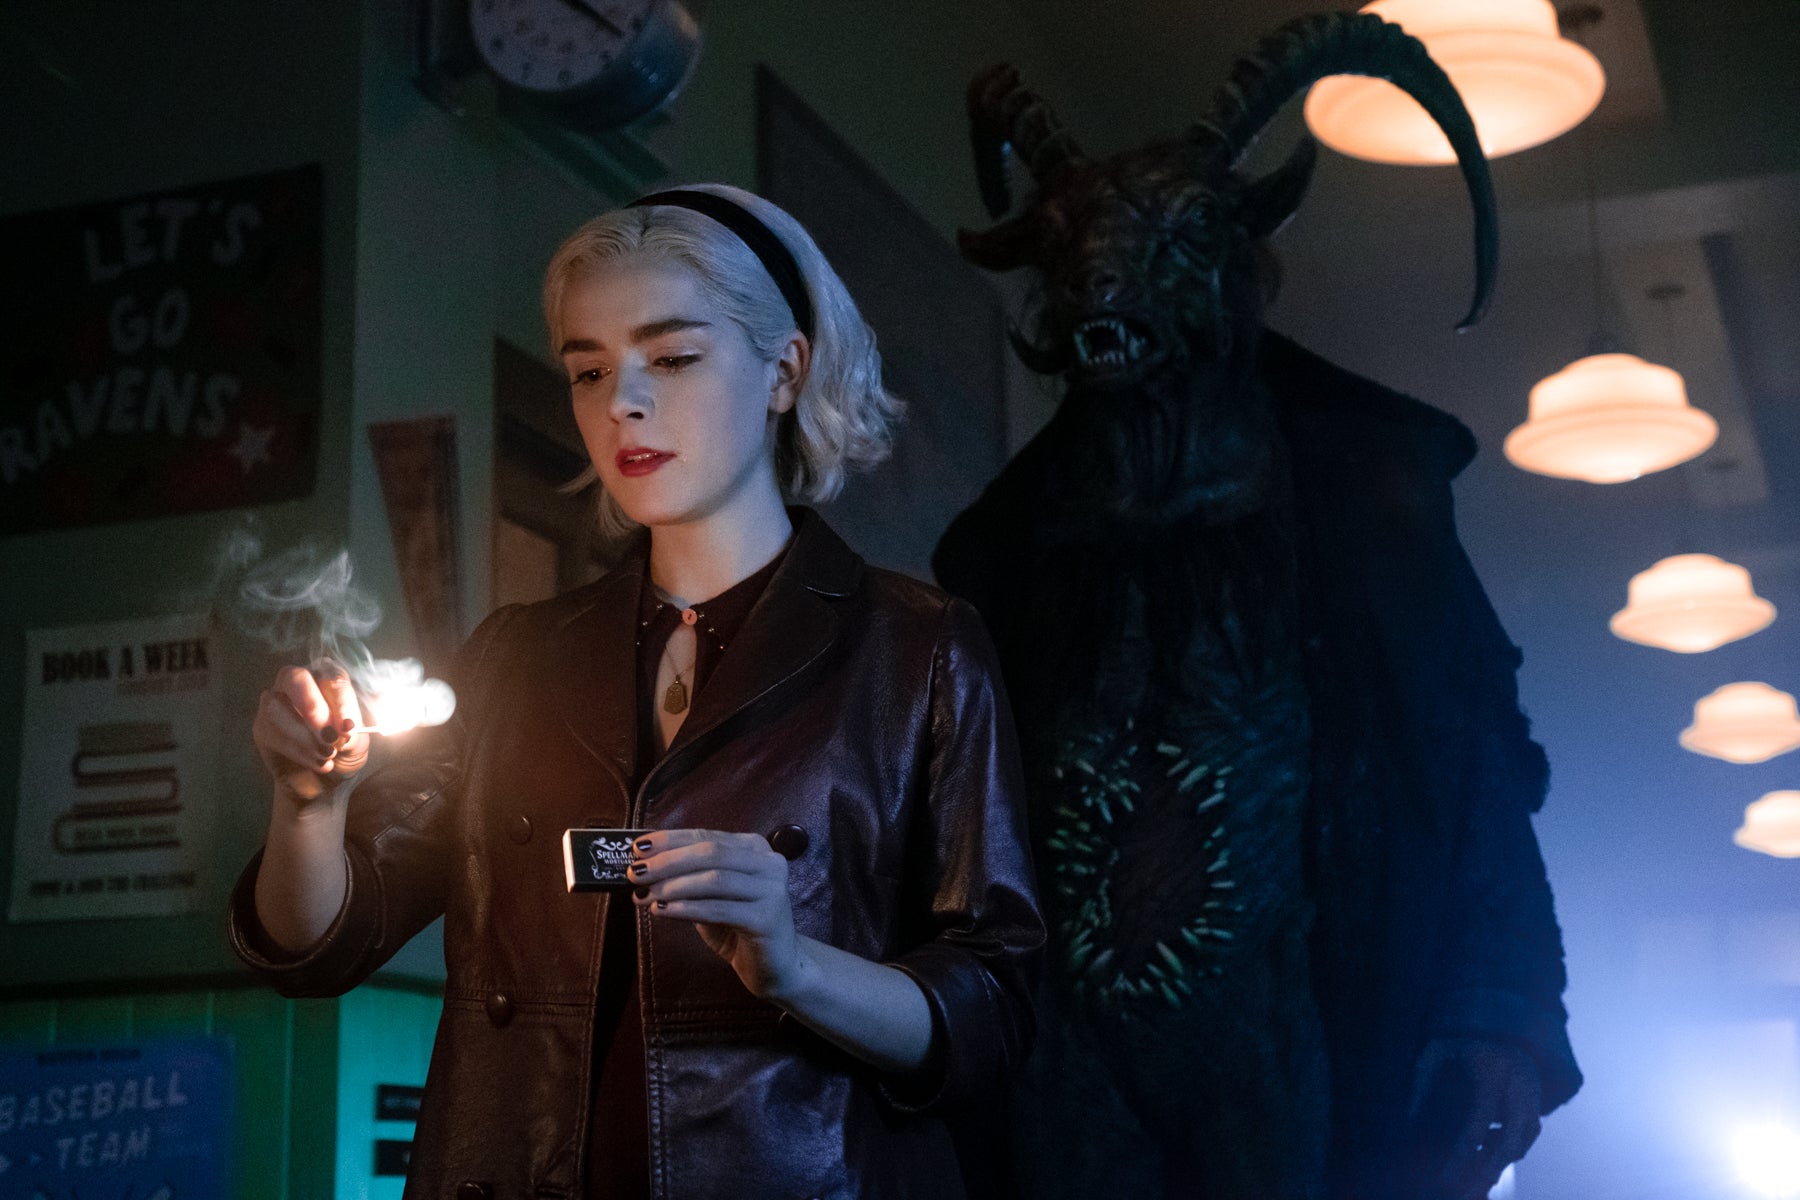 Sabrina Spellman lights a match in a dark hallway while a demon stands behind her in a scene from Chilling Adventures of Sabrina.